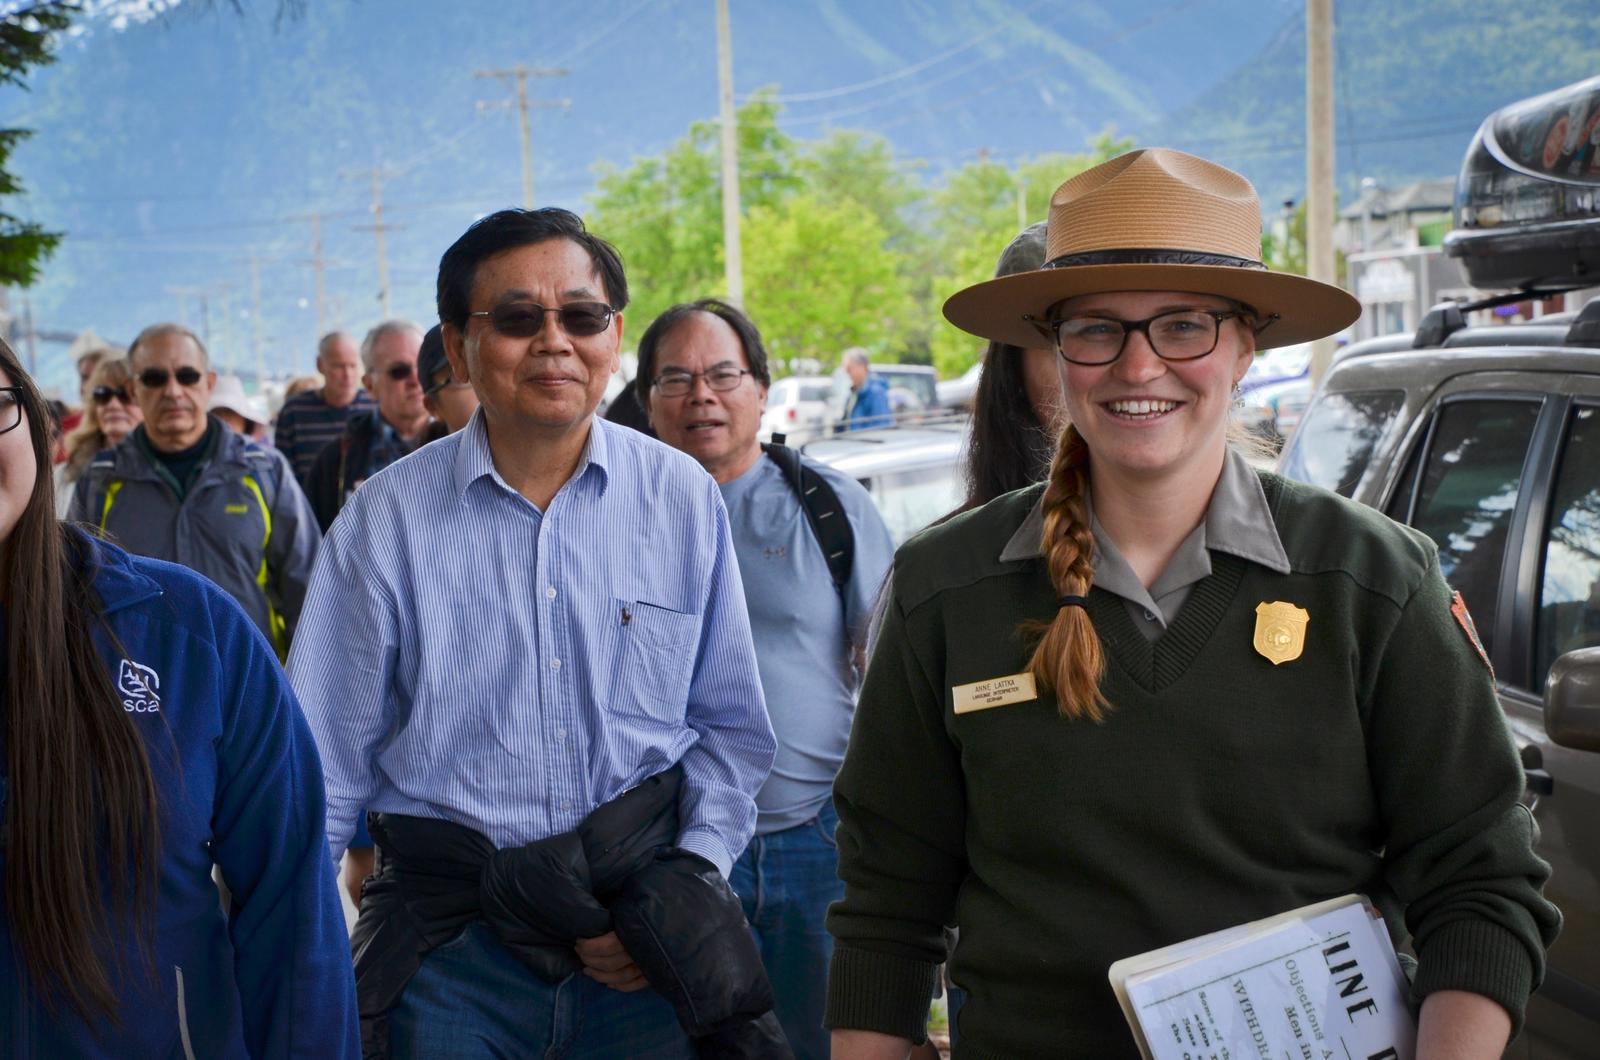 A ranger smiles at the camera with tour group walking behind.